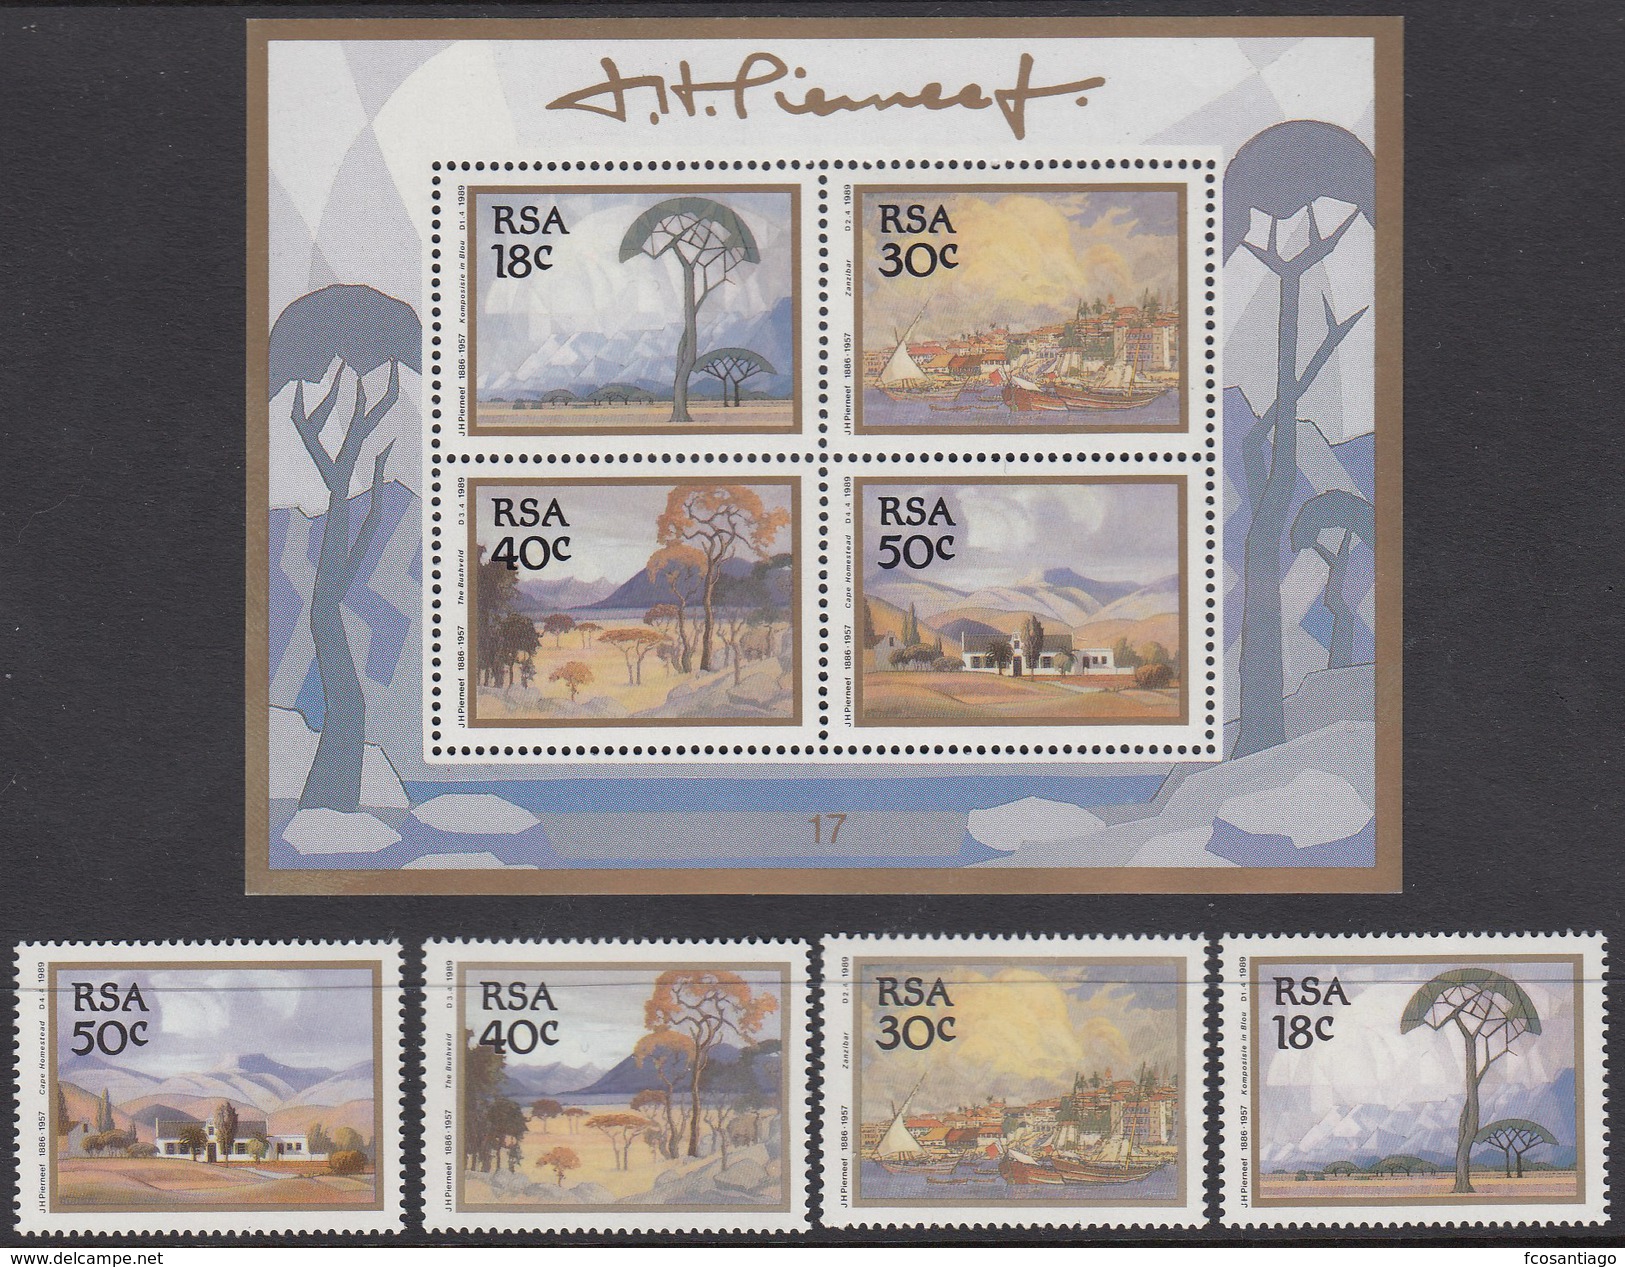 AFRICA DEL SUR 1989 - Yvert #696/99+H23 - MNH ** - Unused Stamps